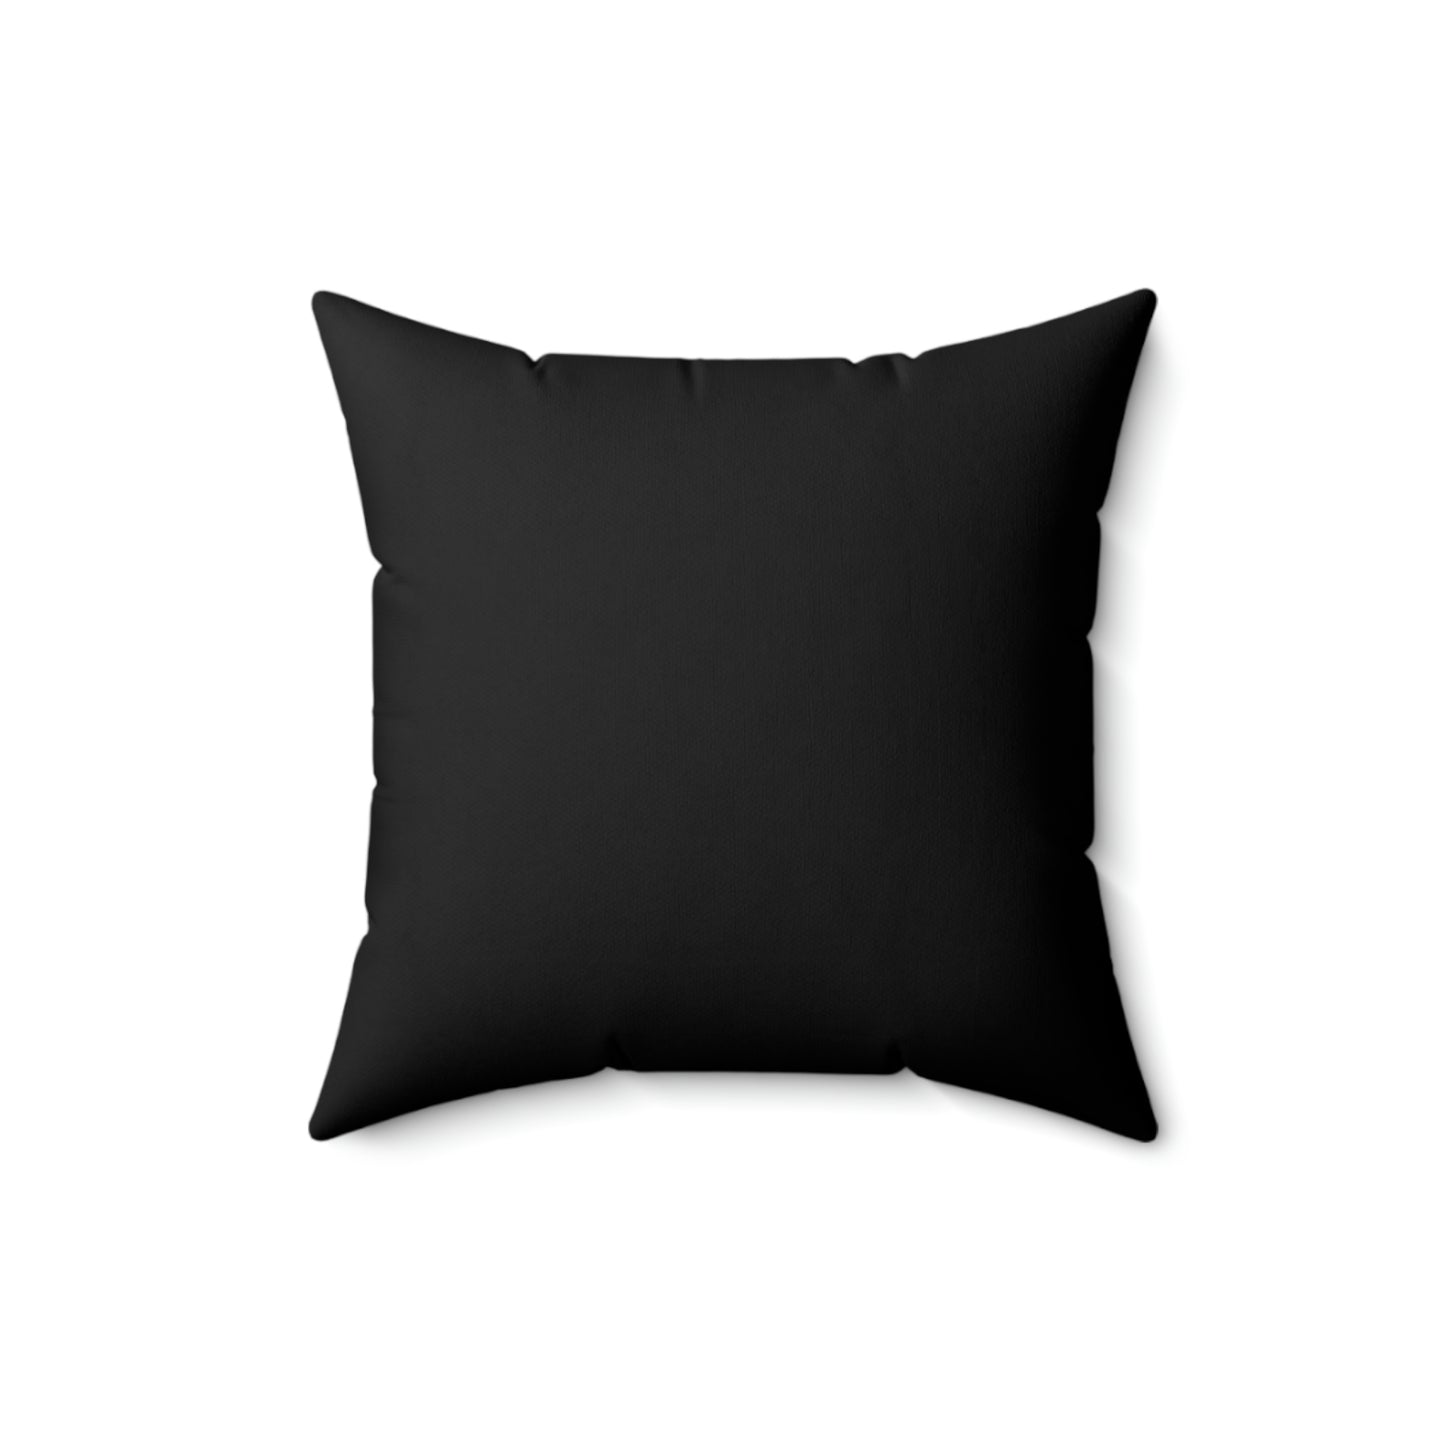 Spun Polyester Square Pillow Case ”Roof on Black”